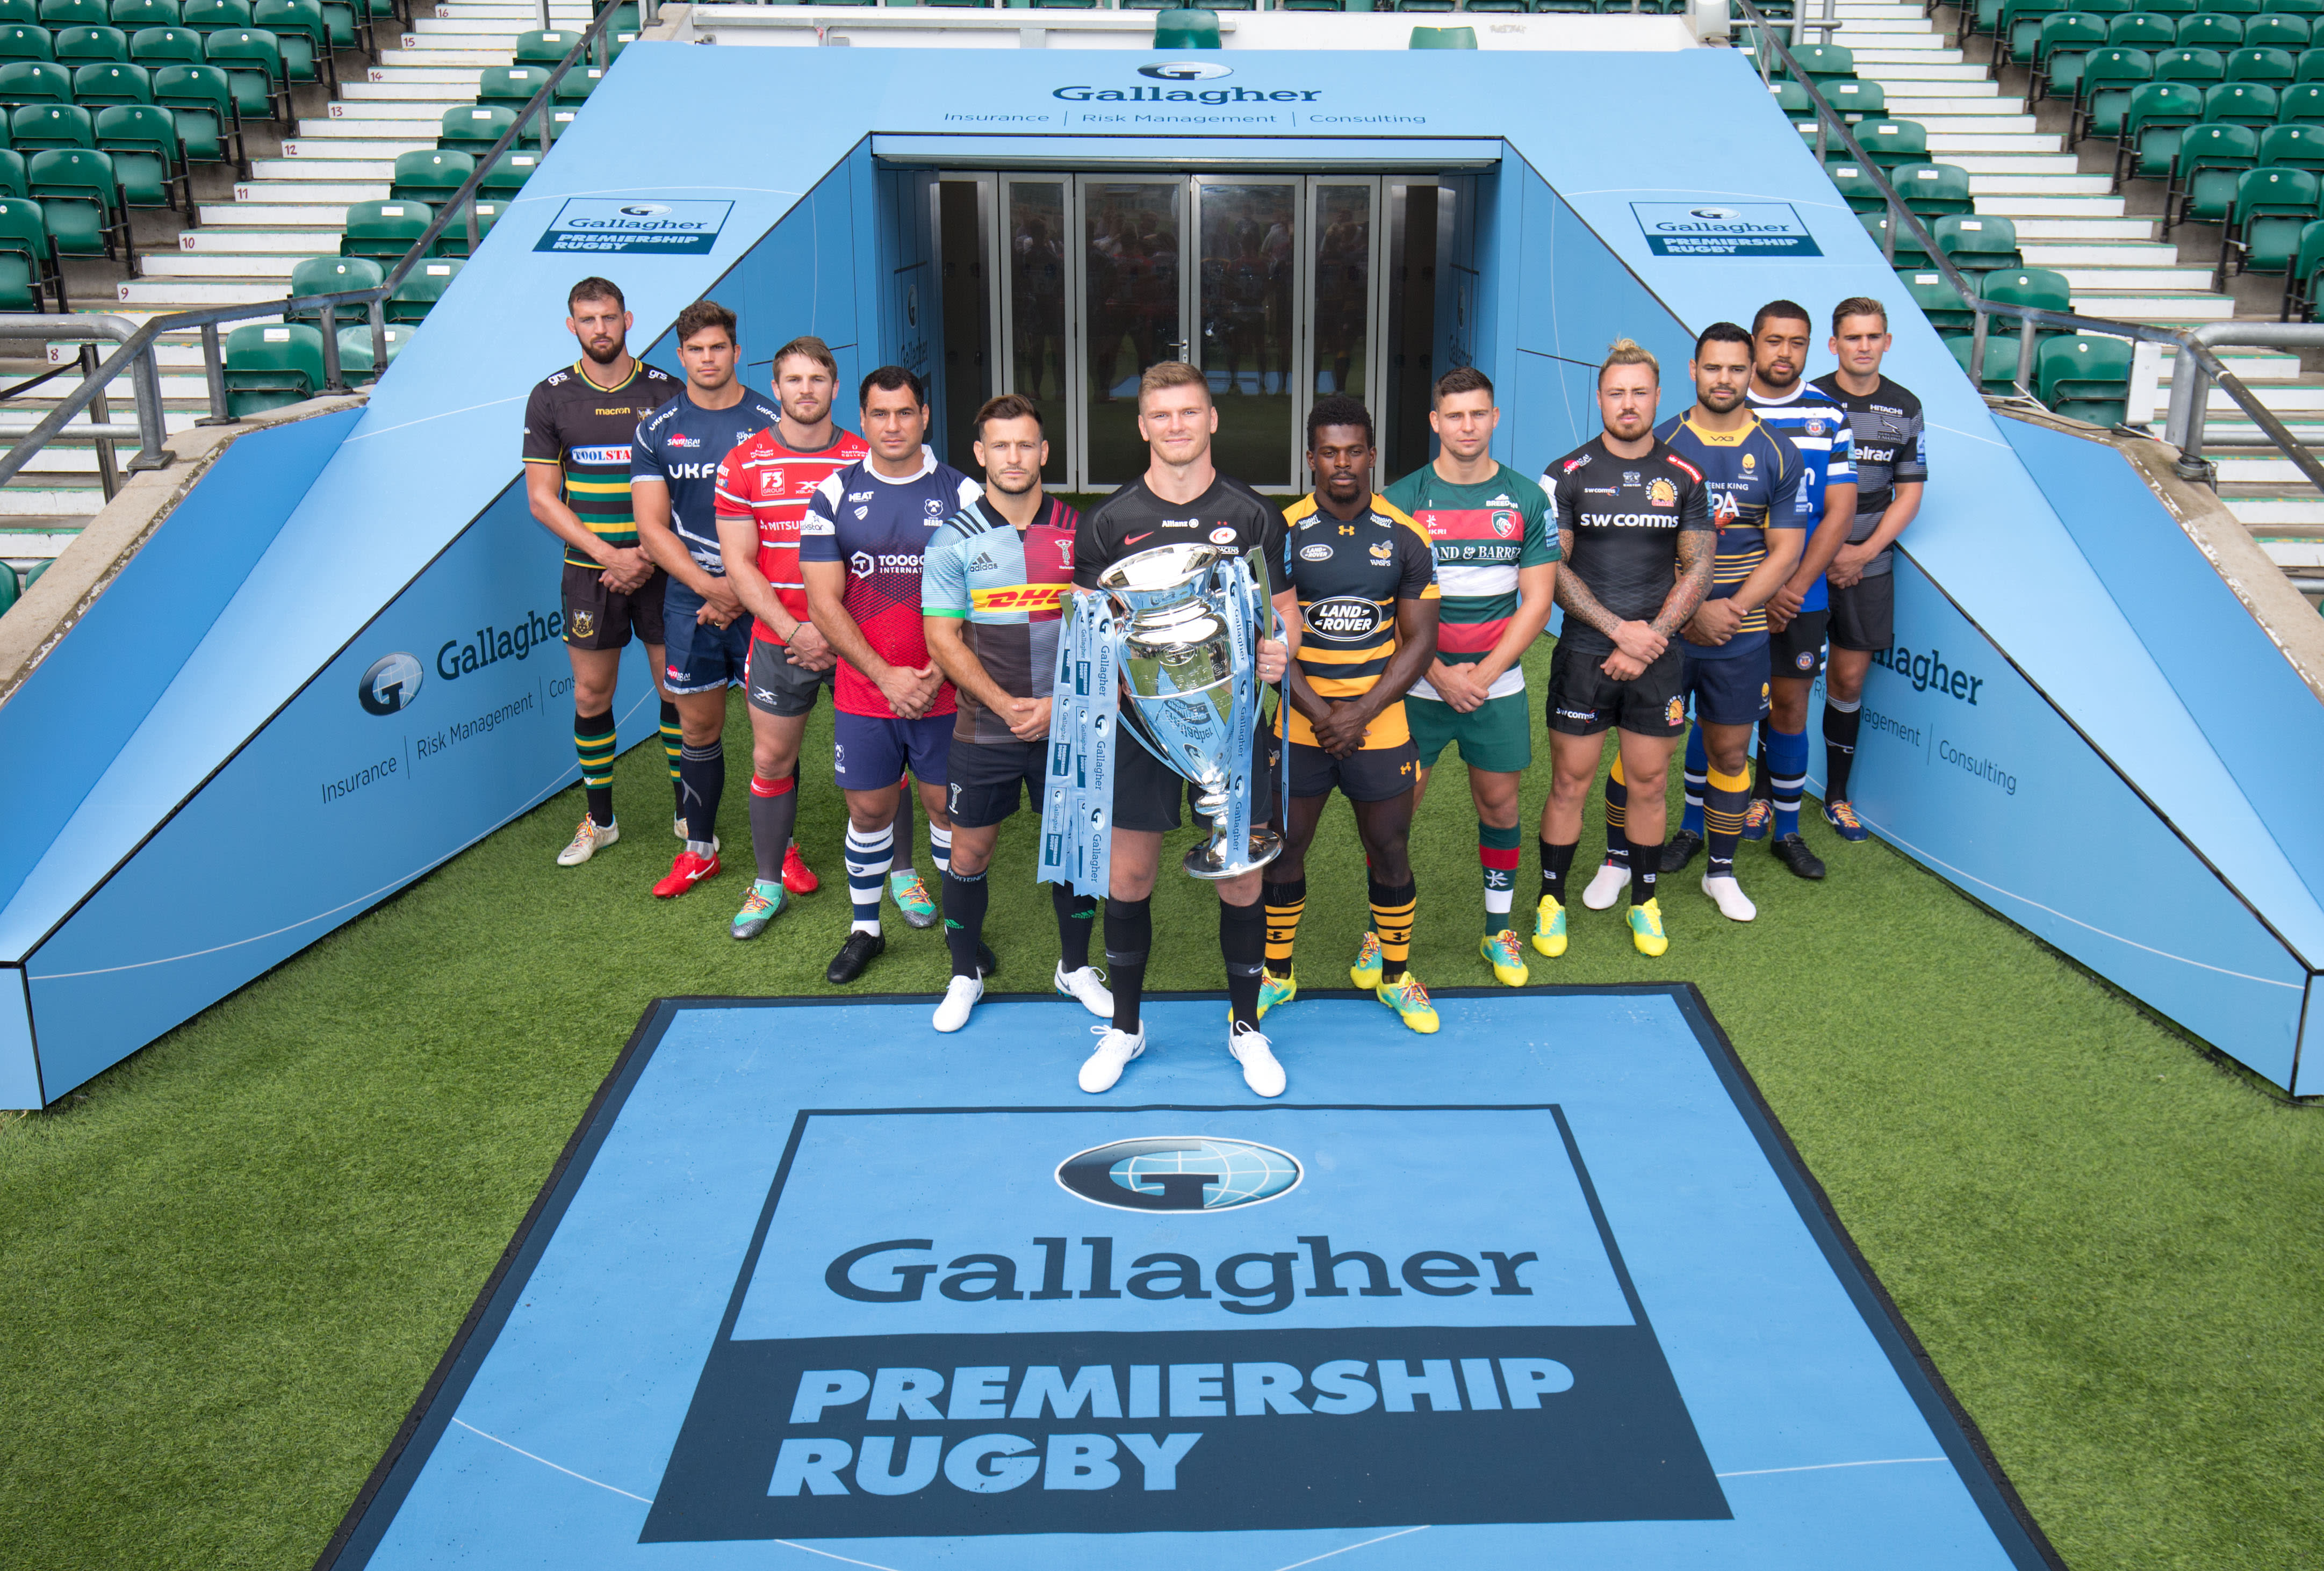 Gallagher Premiership rugby players pose with the trophy.